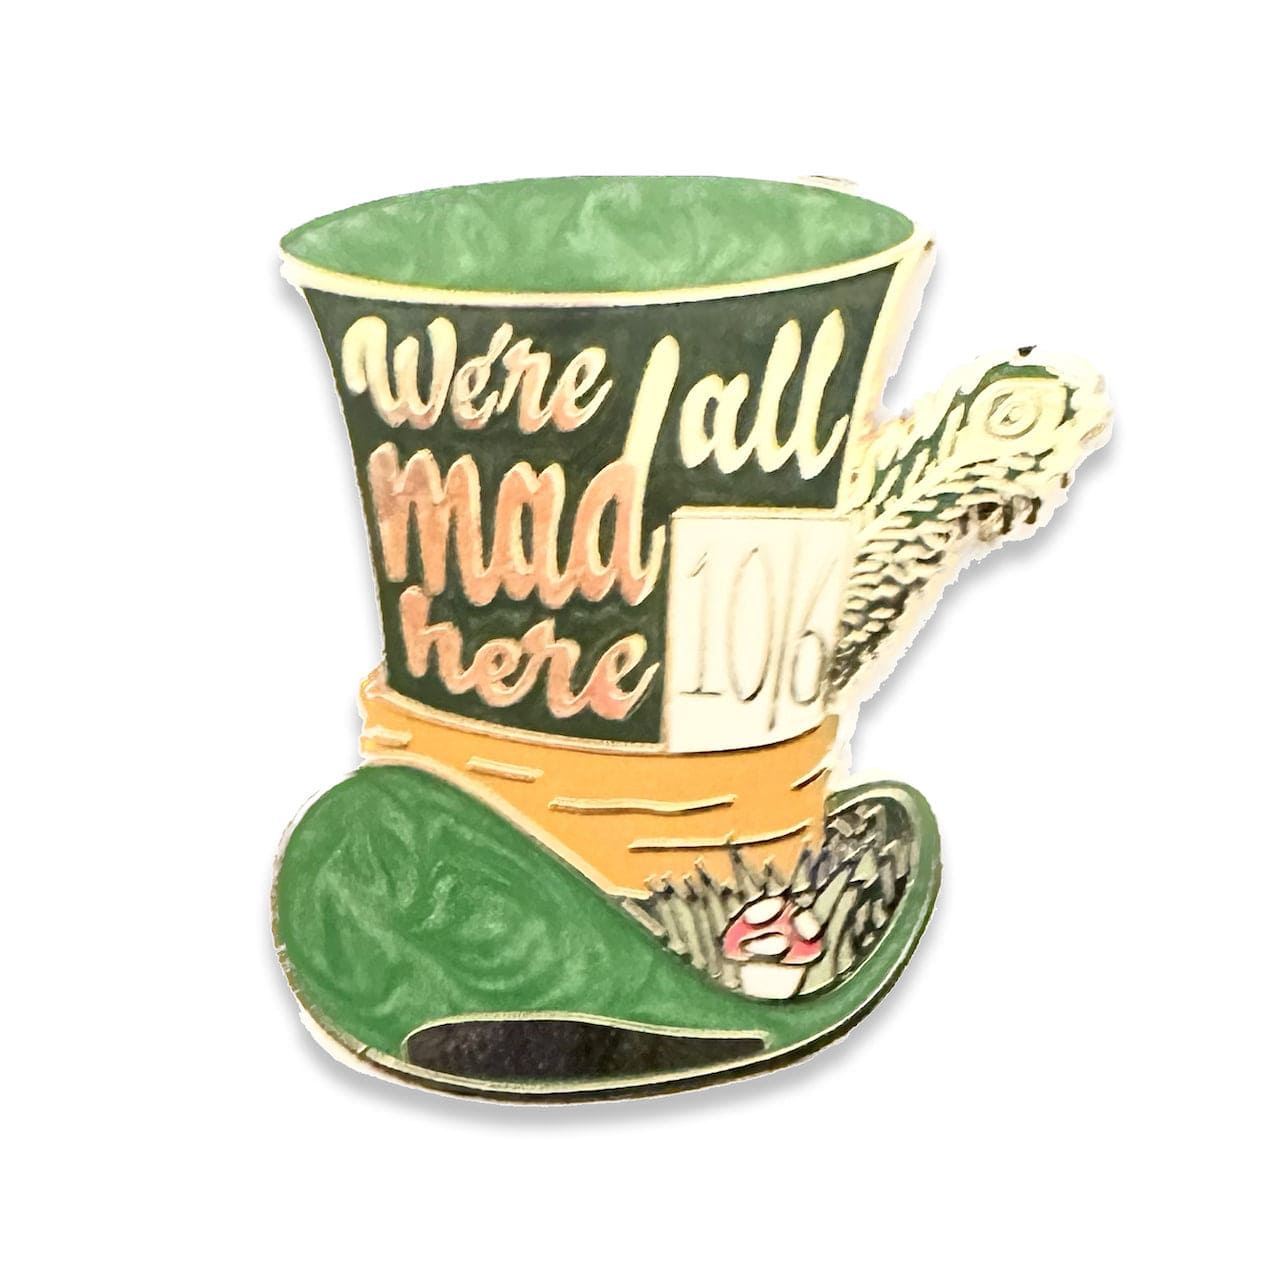 Pinbuds Enamel pin "We're all mad here pin" - Mad hatter quote pin